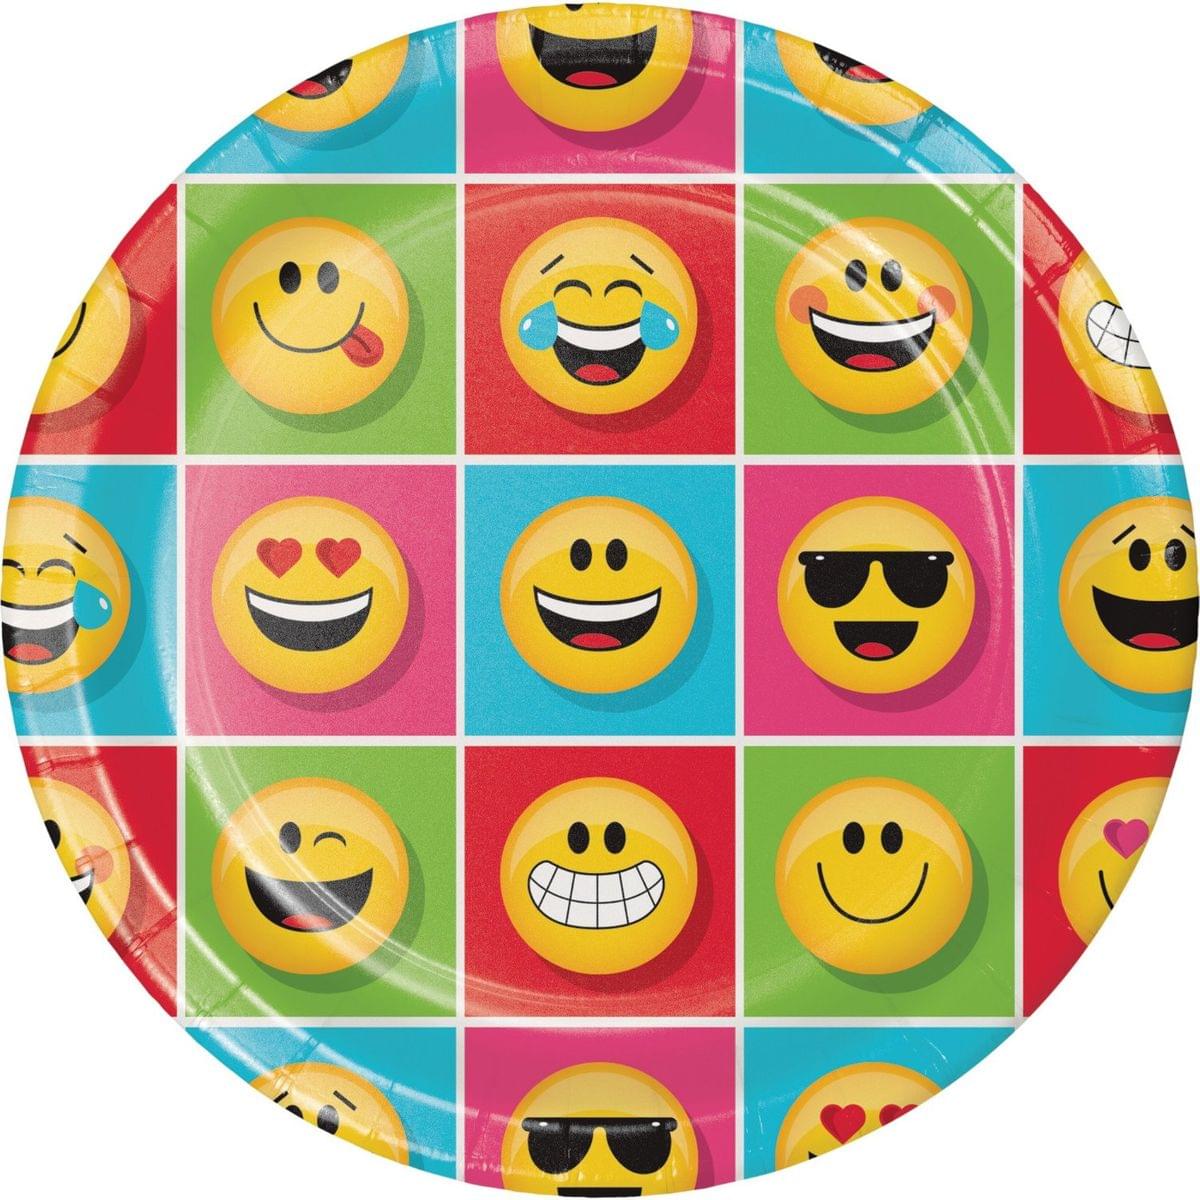 Show Your Emojions 8.75" Paper Dinner Plates: 8 Count